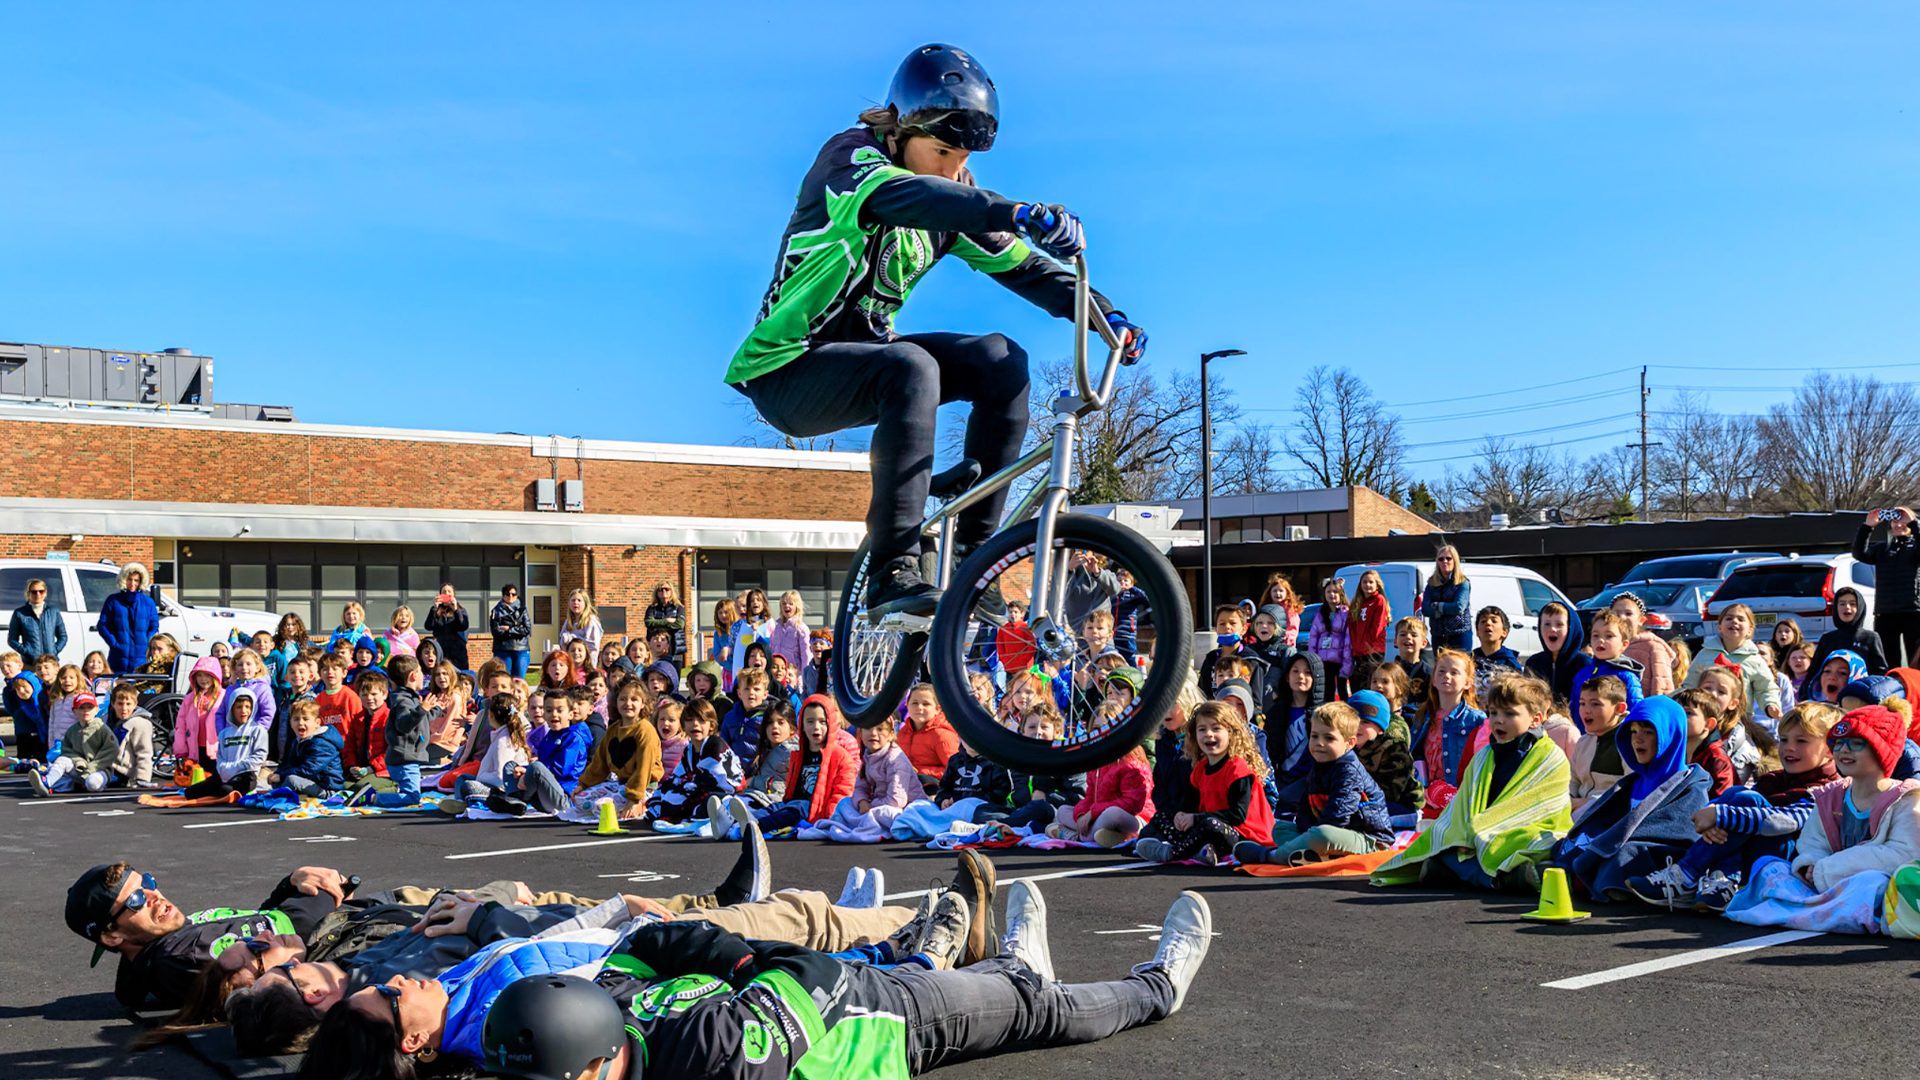 HUGE HOP! Dialed Action BMX pro clears 5 brave teachers at a school in Fair Haven New Jersey